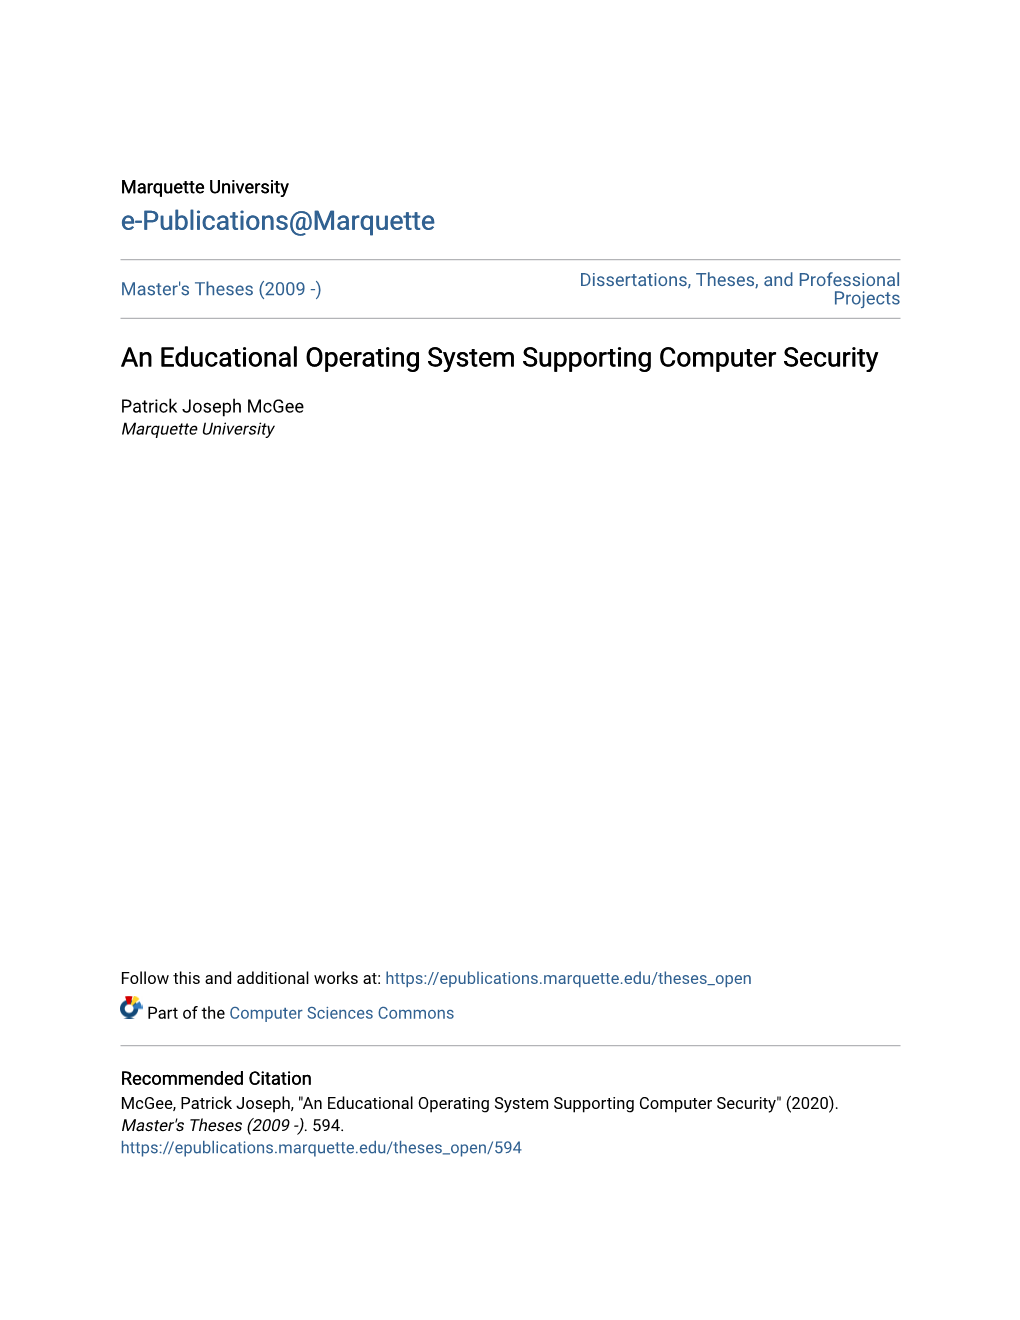 An Educational Operating System Supporting Computer Security